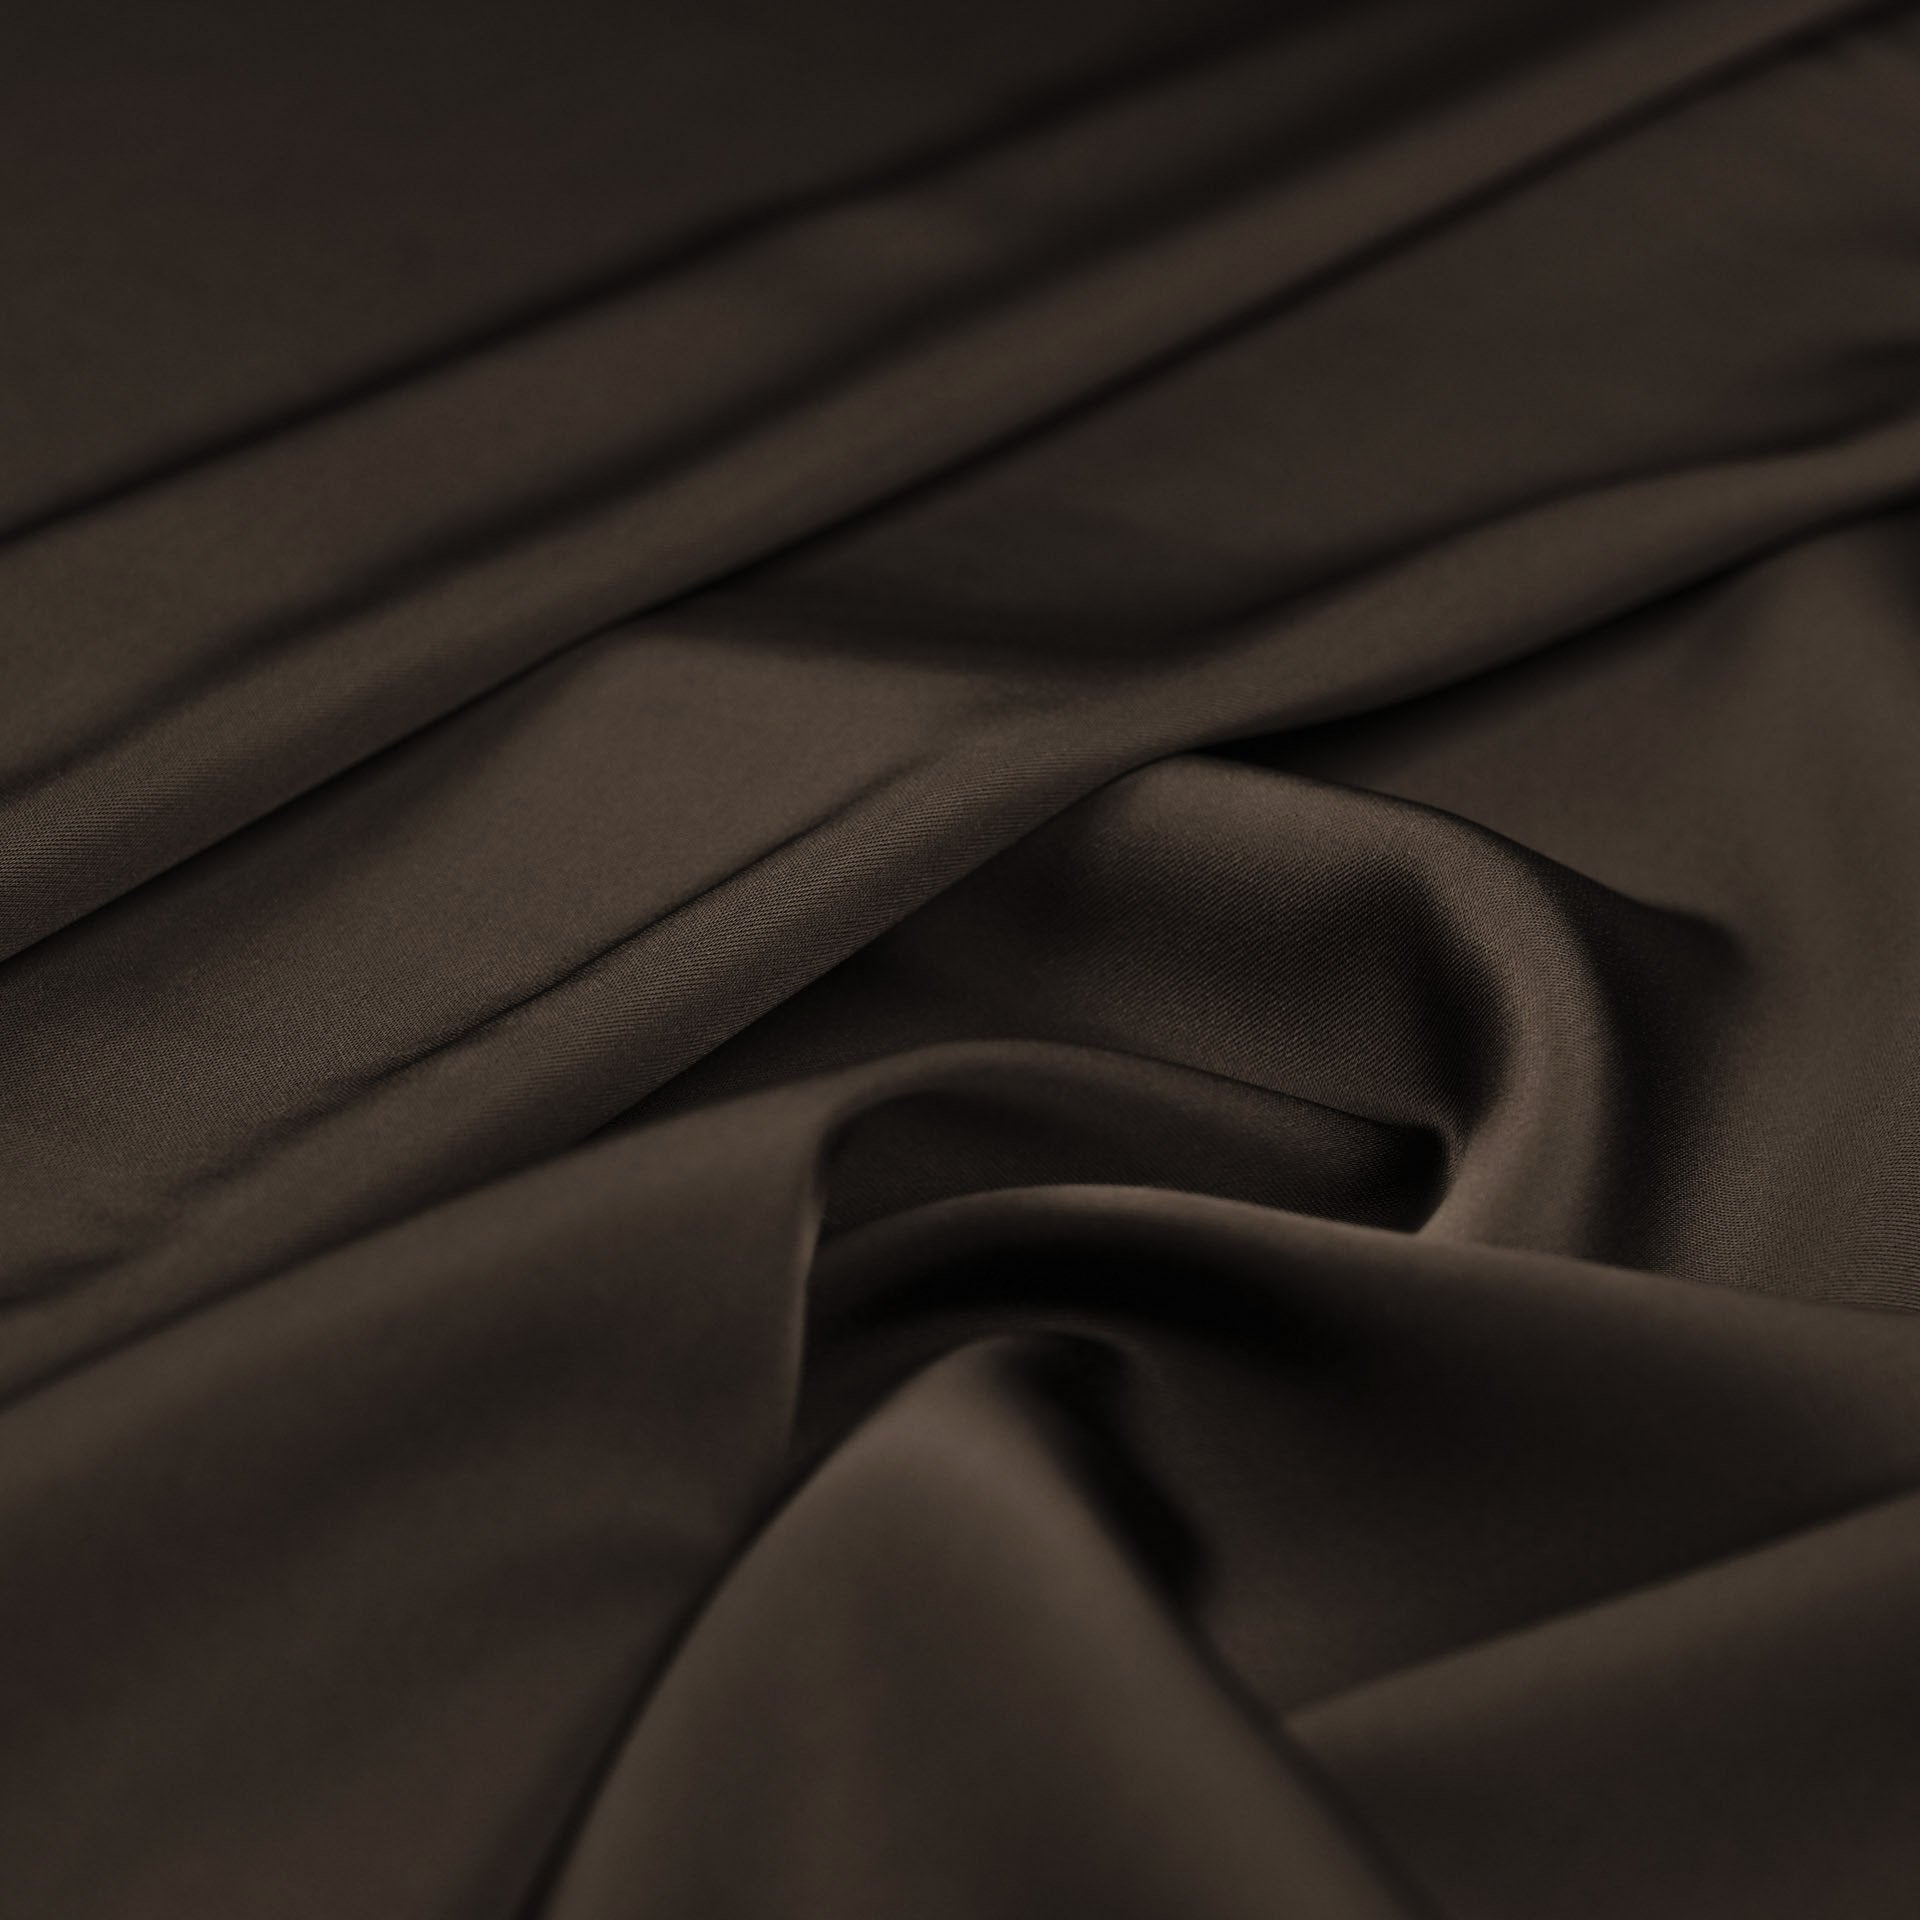 Brown Stretchy Satin Fabric 6649